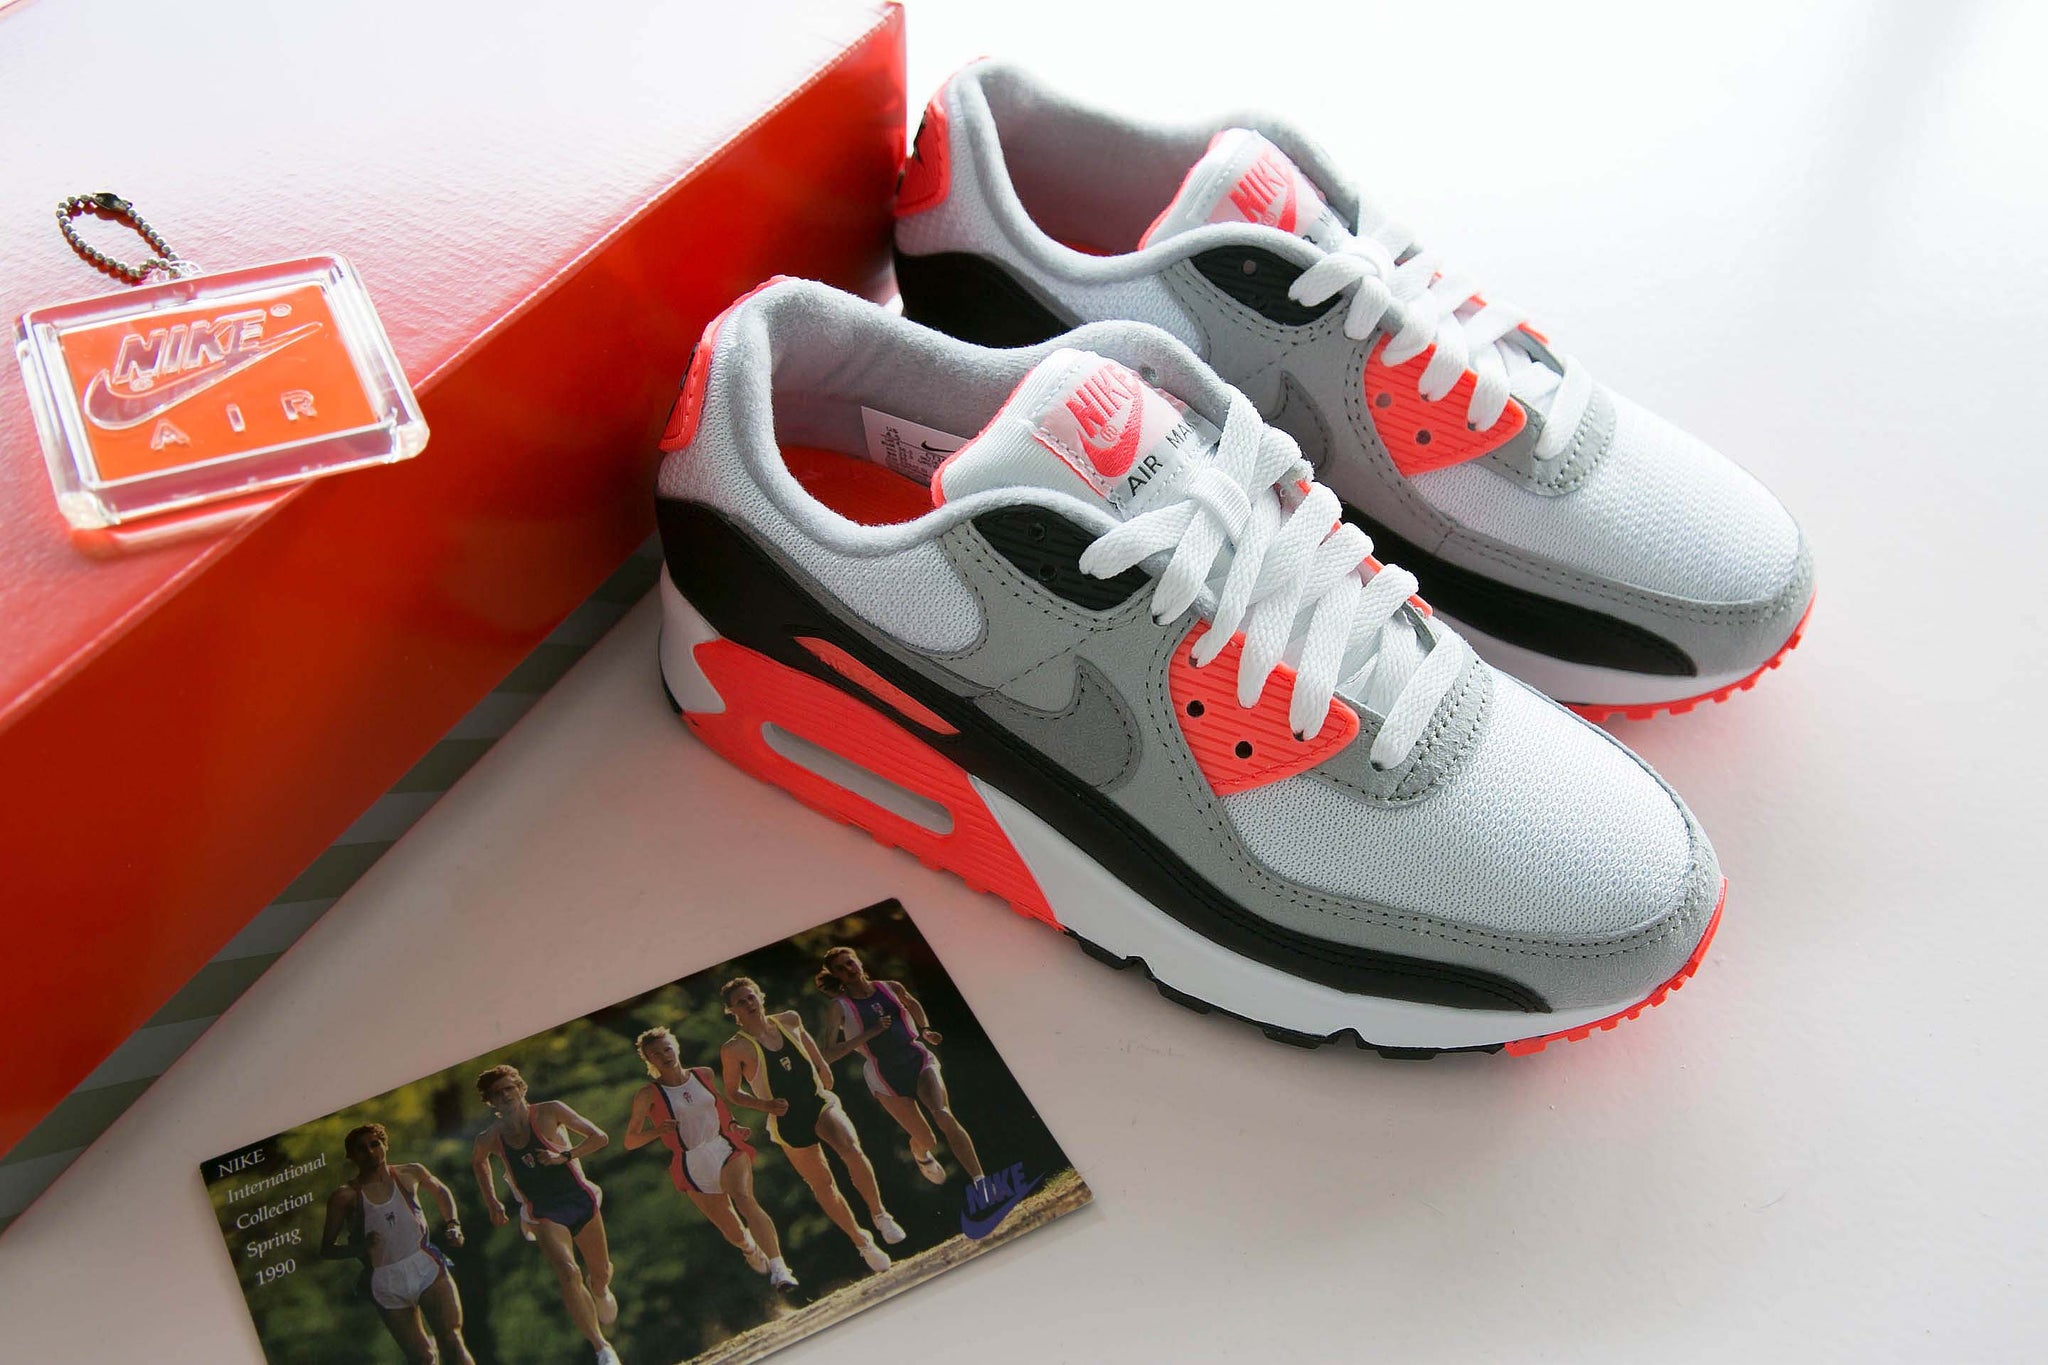 SNEAKER RELEASES | Nike Air Max III "Infrared" | October 22